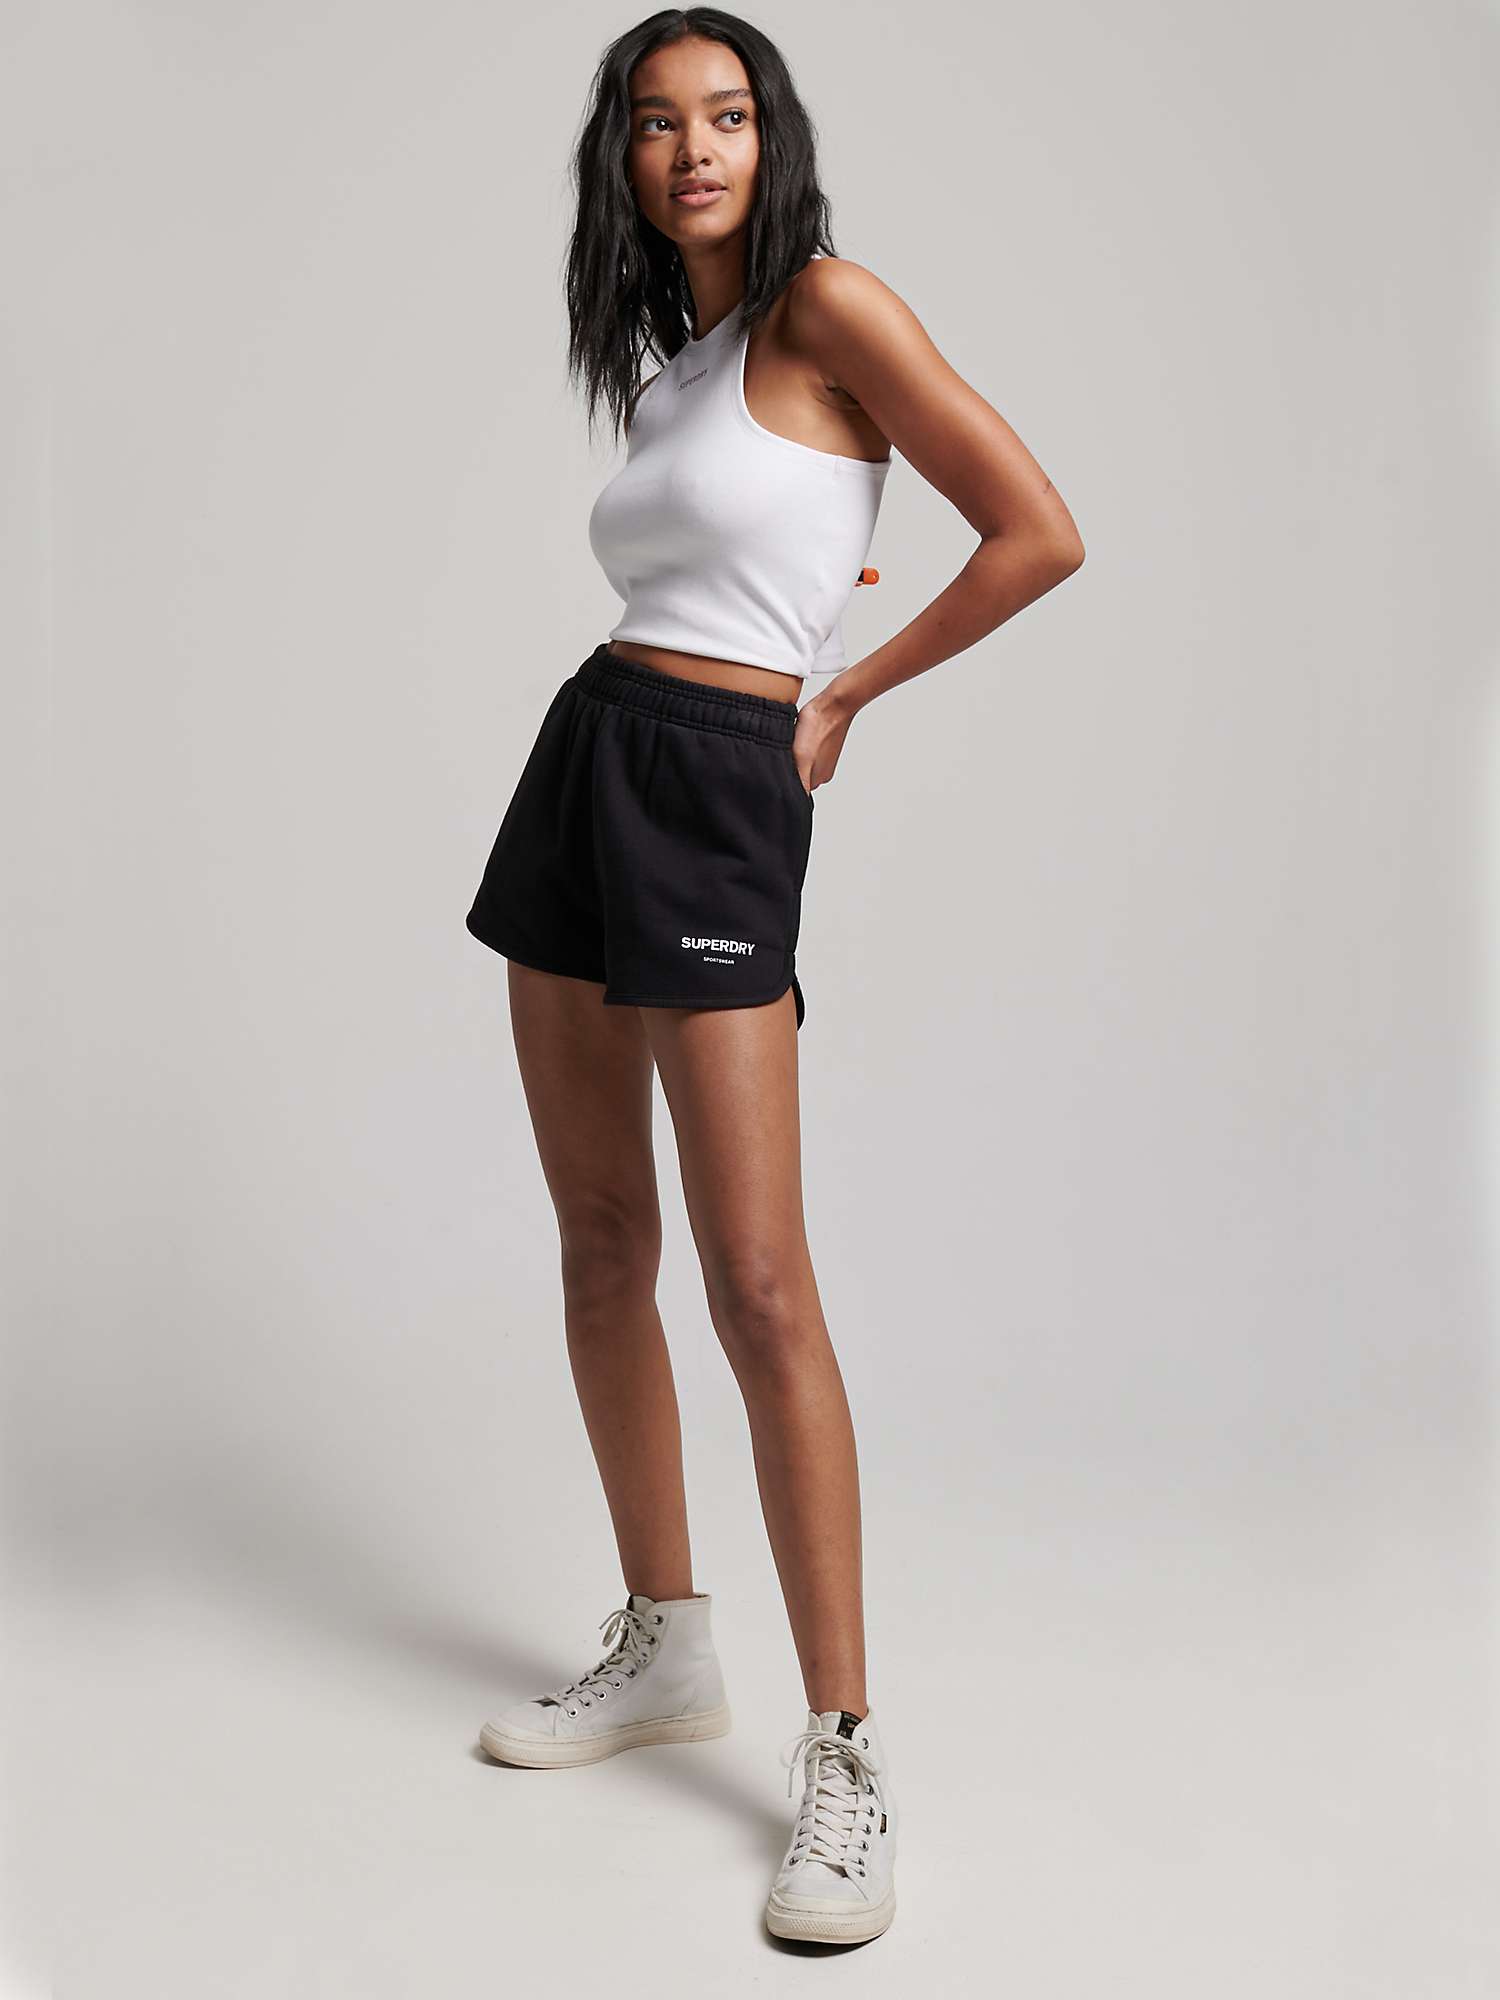 Buy Superdry Core Sport Sweat Shorts Online at johnlewis.com